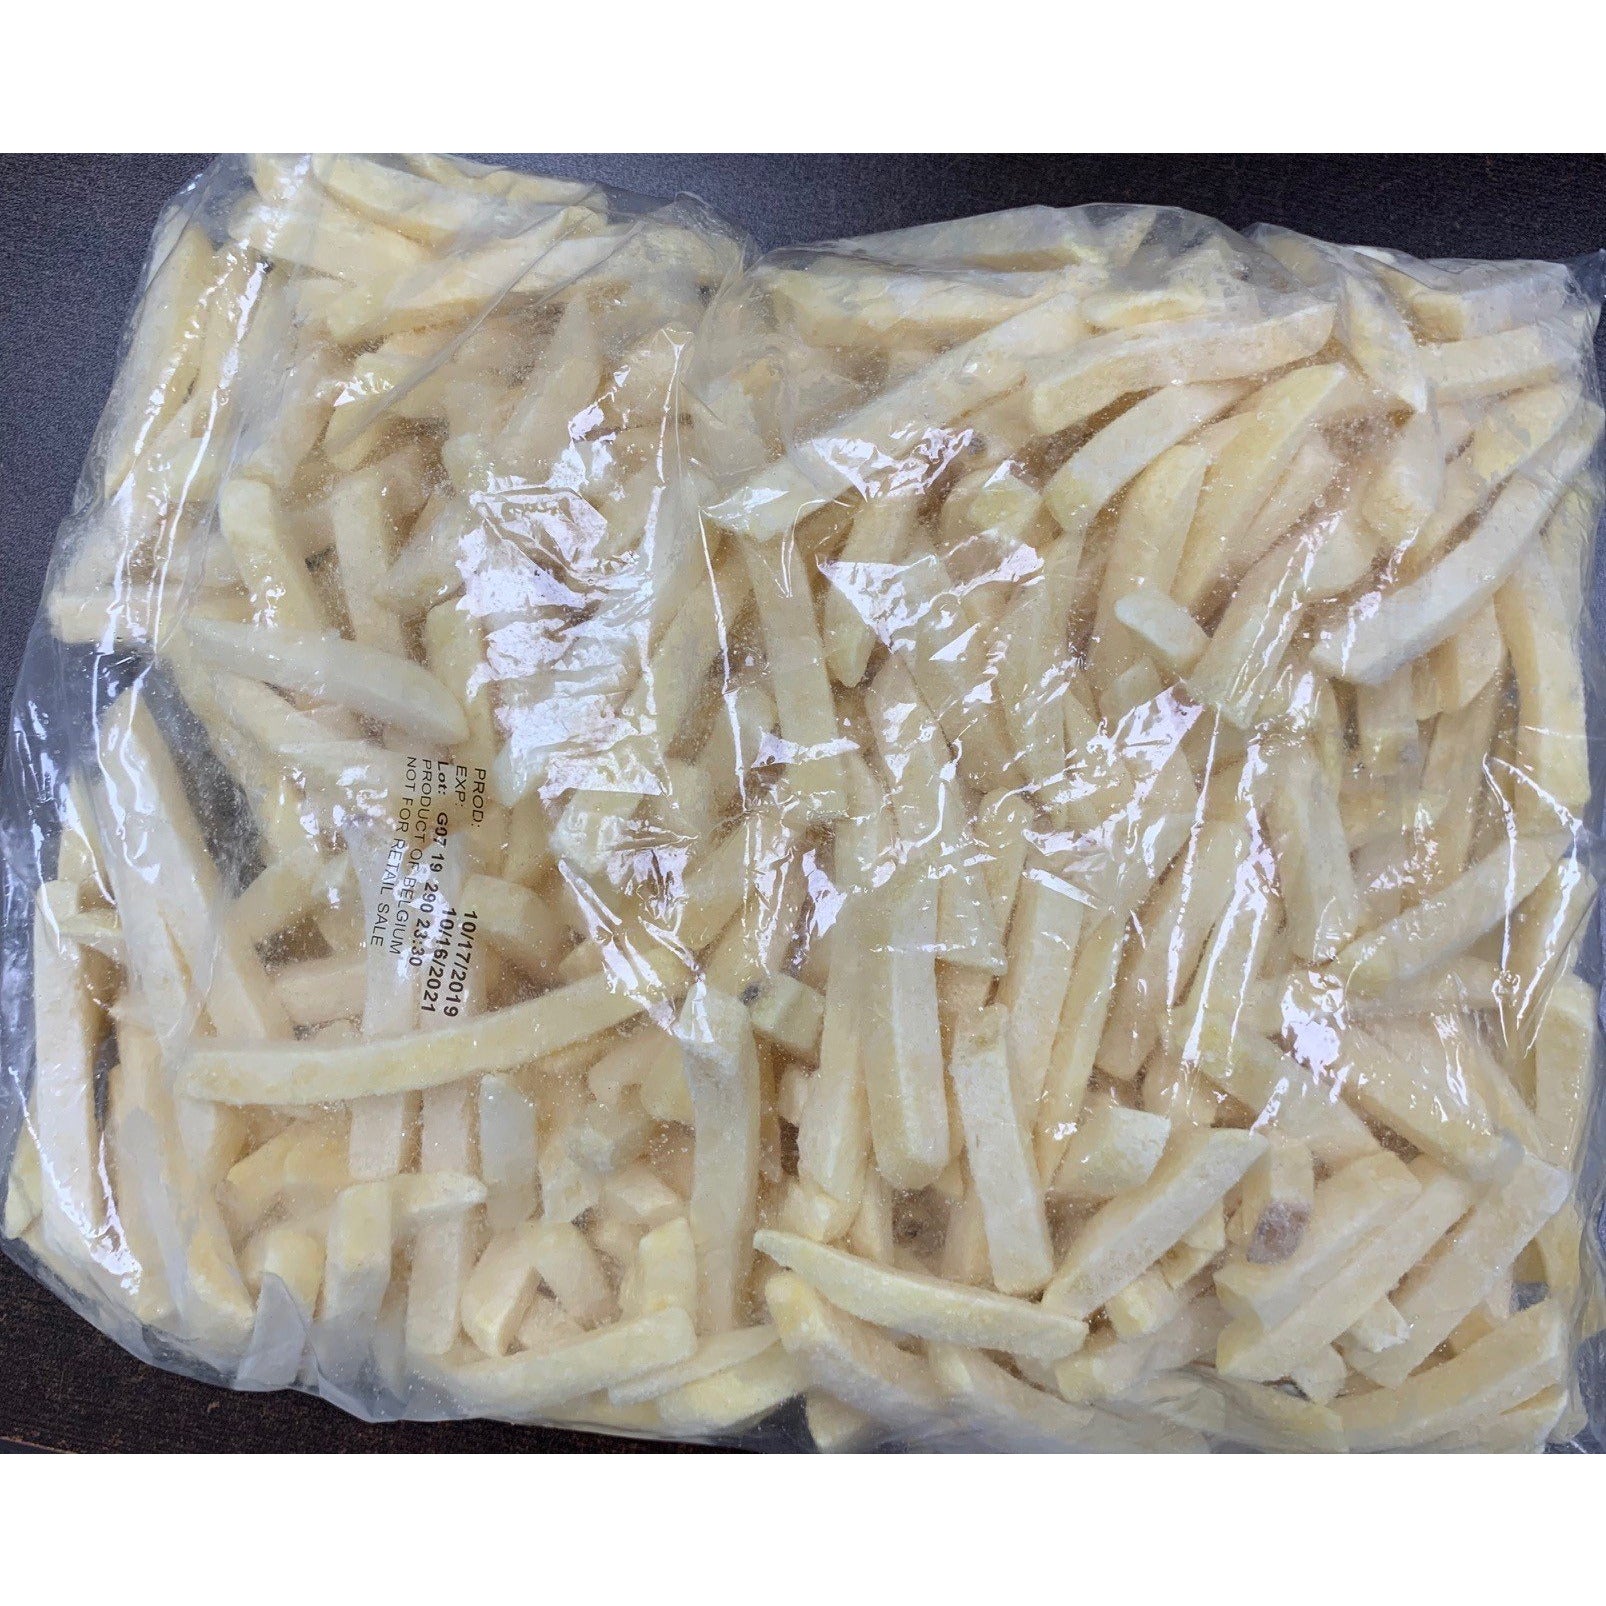 French Fry-REGULAR Straight Cut-5lbs Per Bag – 495 EXPRESS FOODS